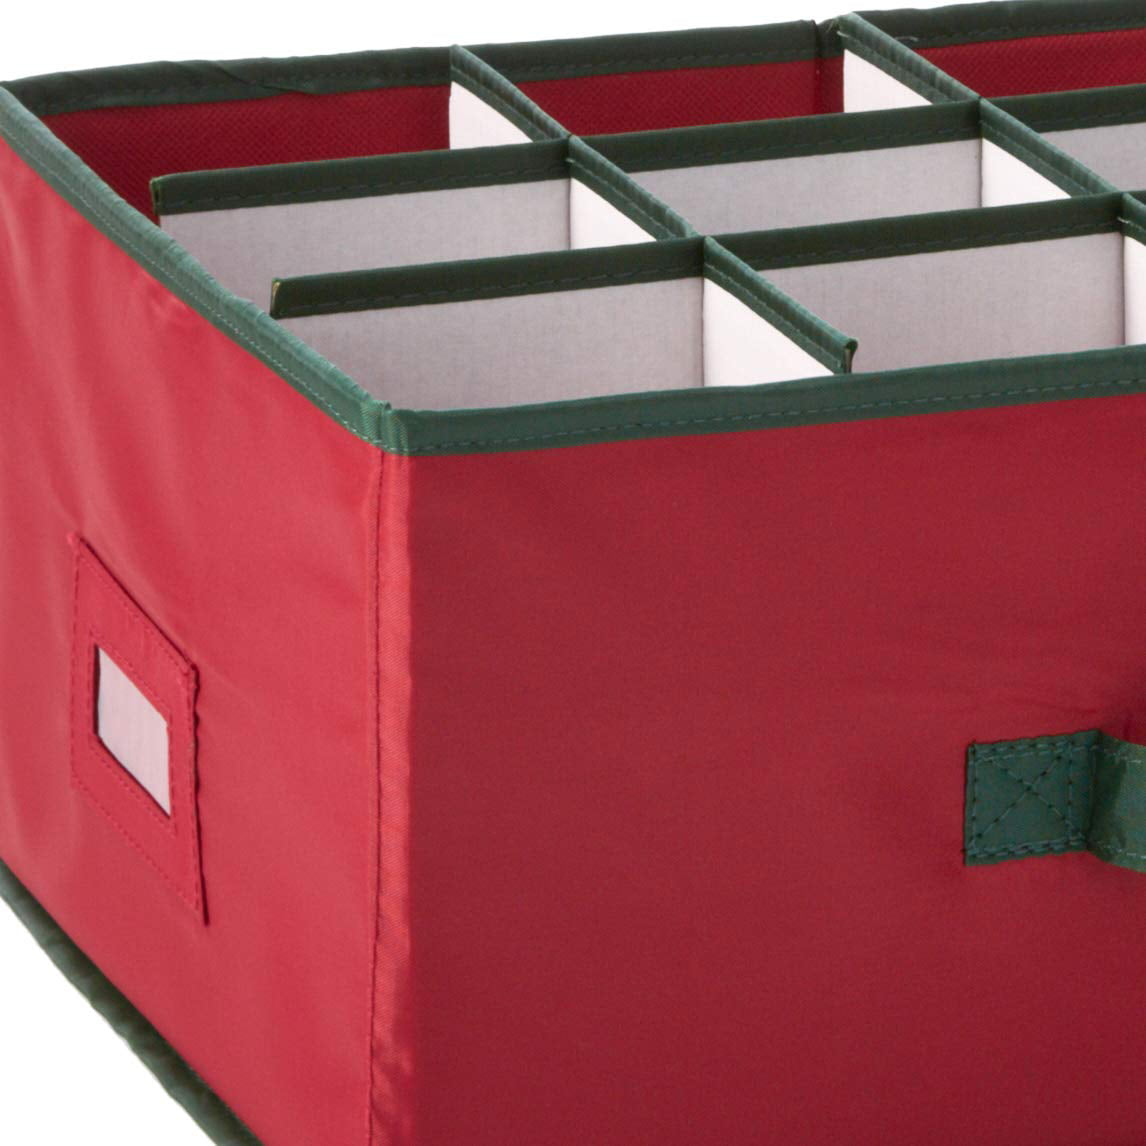 Homz® Small Holiday Heirloom 24 Ornament Storage Box, Red with Green Trim 